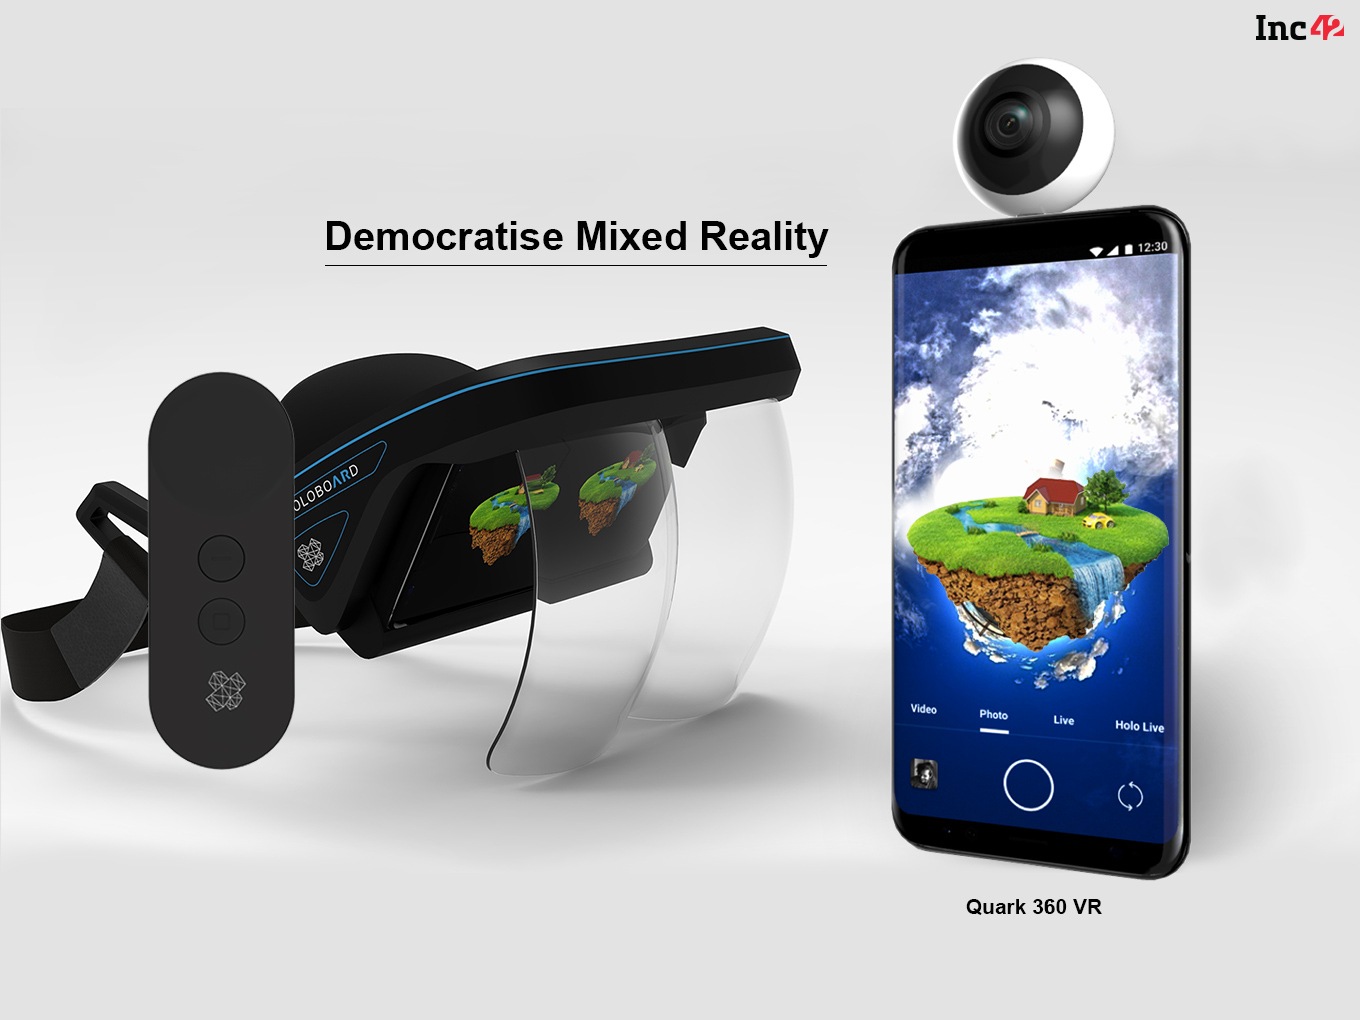 How Deeptech Startup Tesseract Is Democratising Mixed Reality